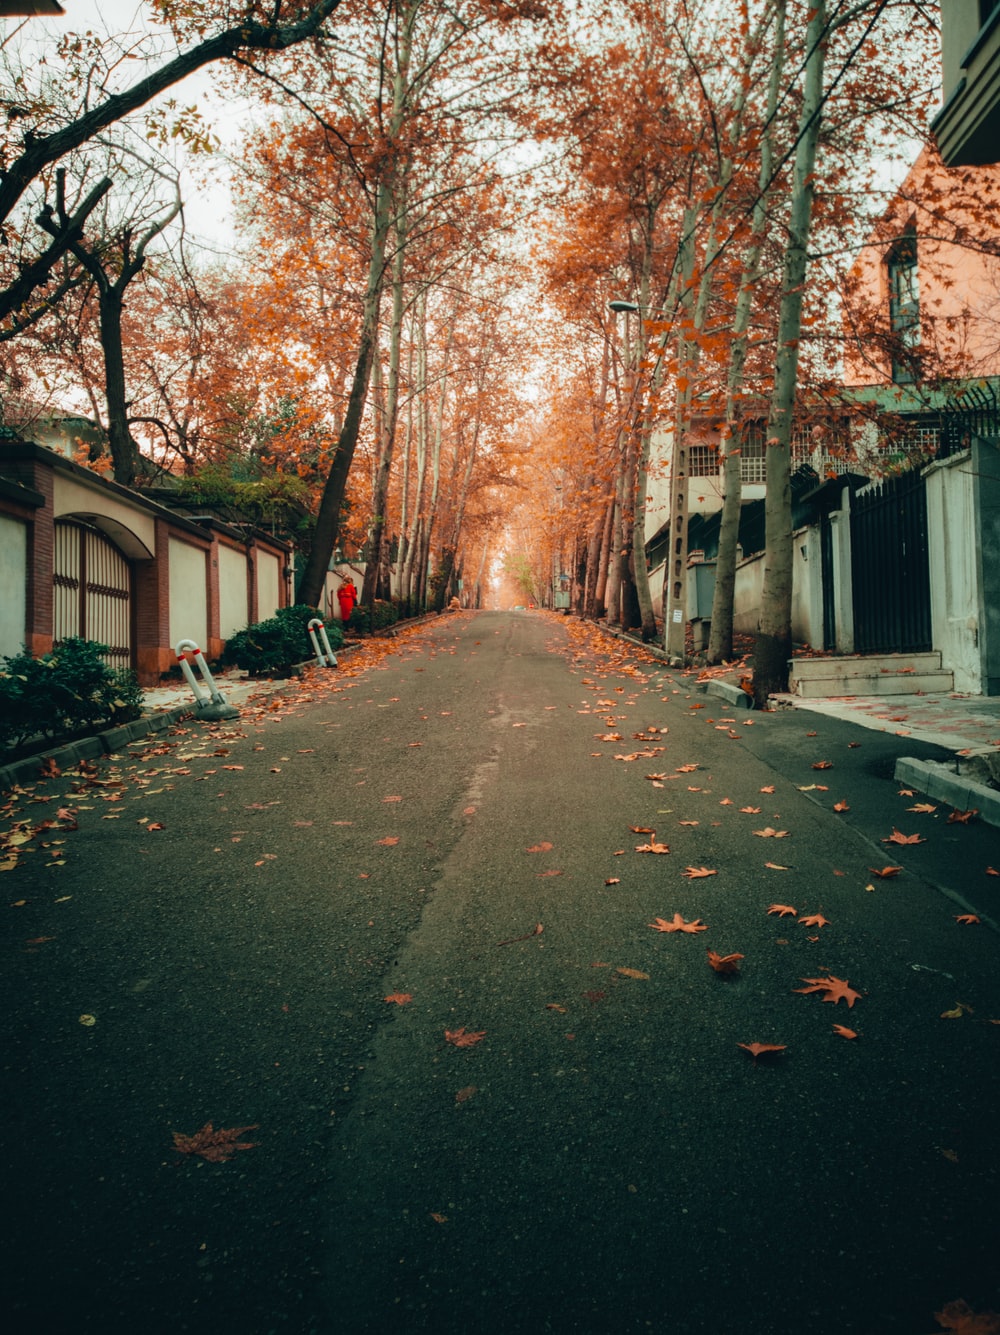 Autumn Street Picture. Download Free Image